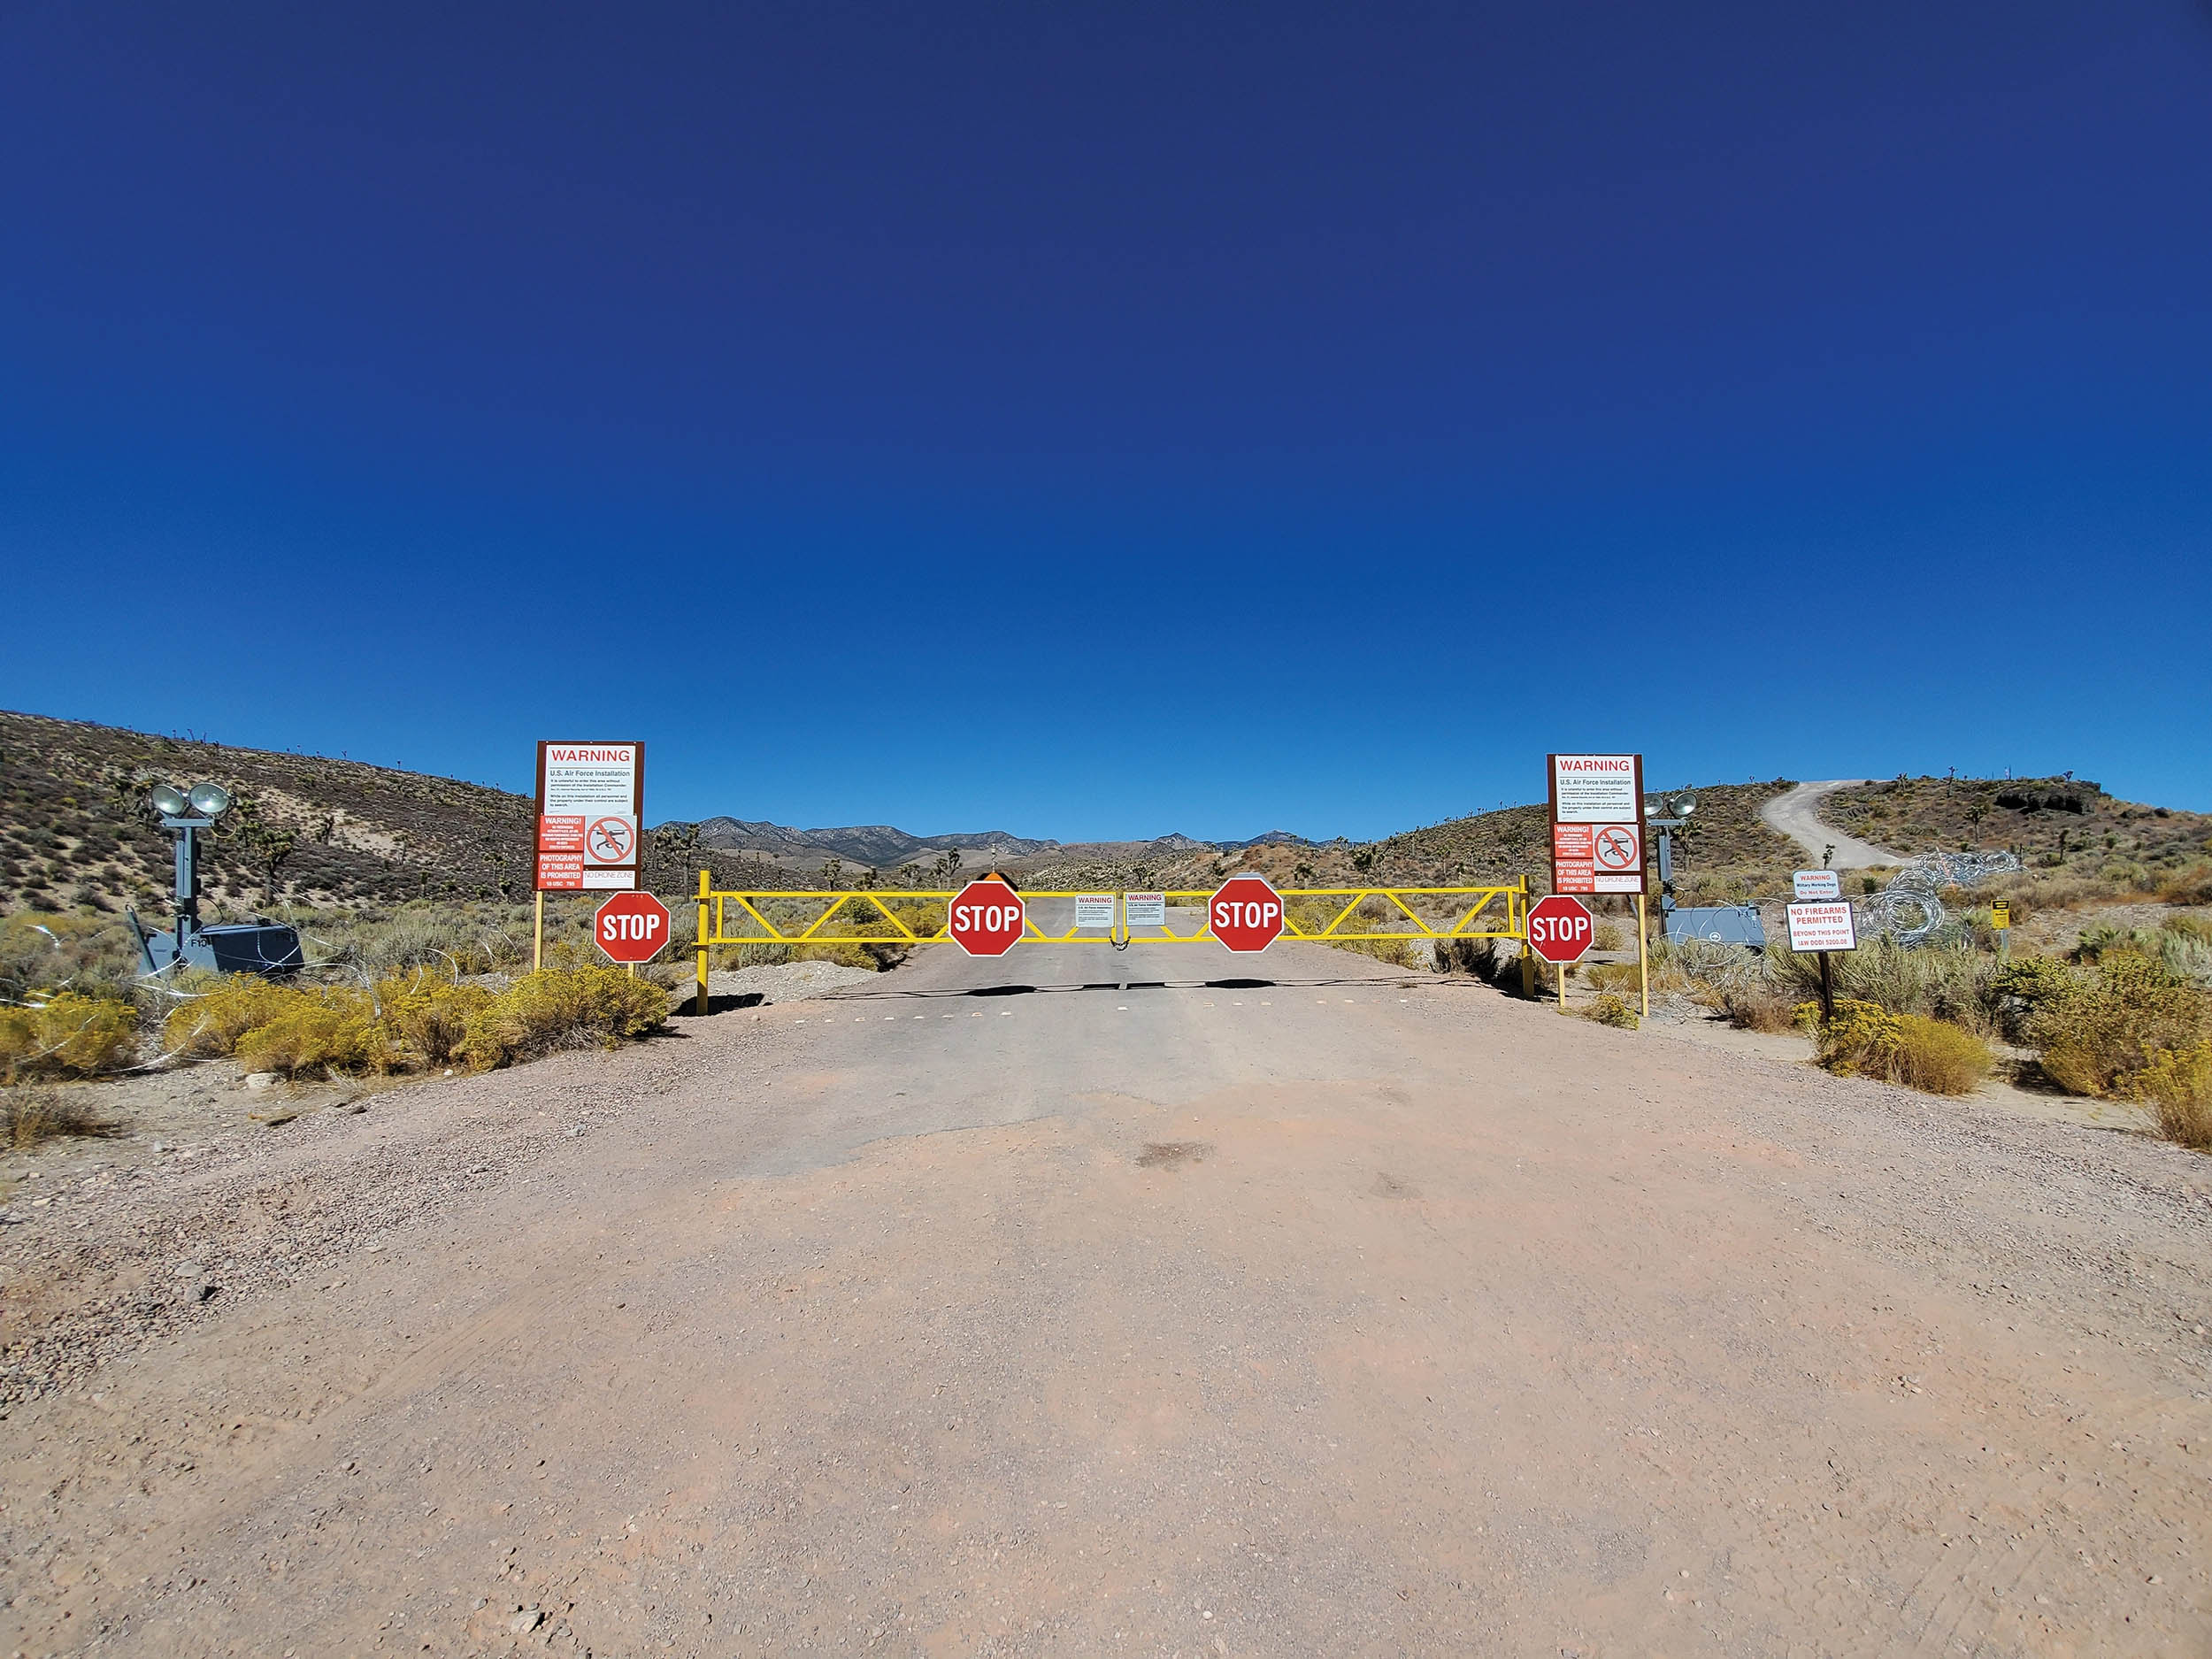 Main gate of Area 51, Air Force Nellis Testing Range, in Lincoln County, Nevada, September 22, 2019 (Courtesy David James Henry)